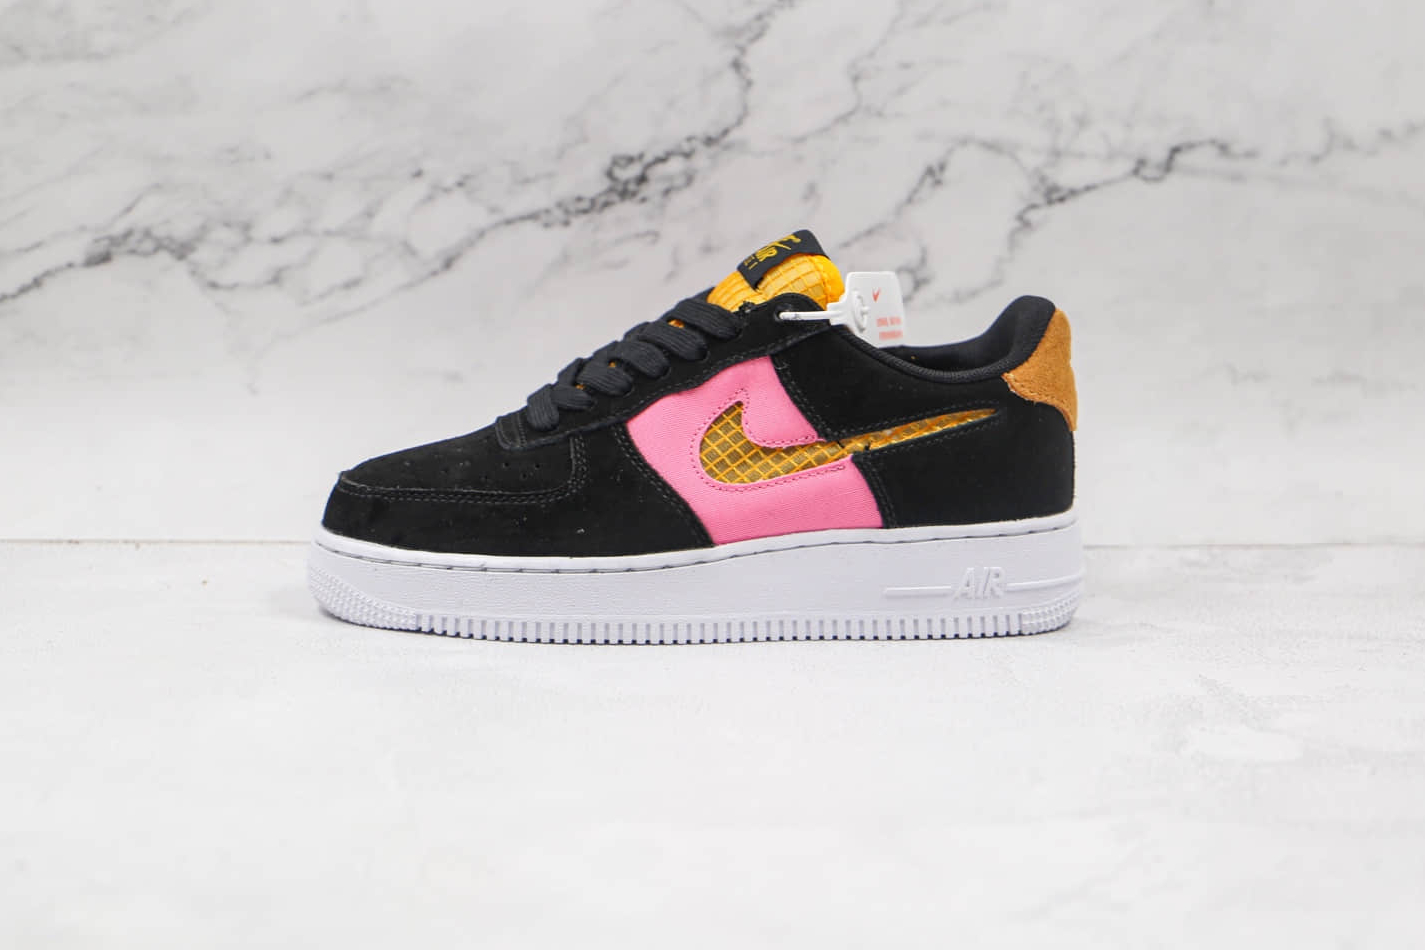 Nike Air Force 1 Low 'Black Lotus Pink' CJ4093-002 - Limited Edition Design and Style.